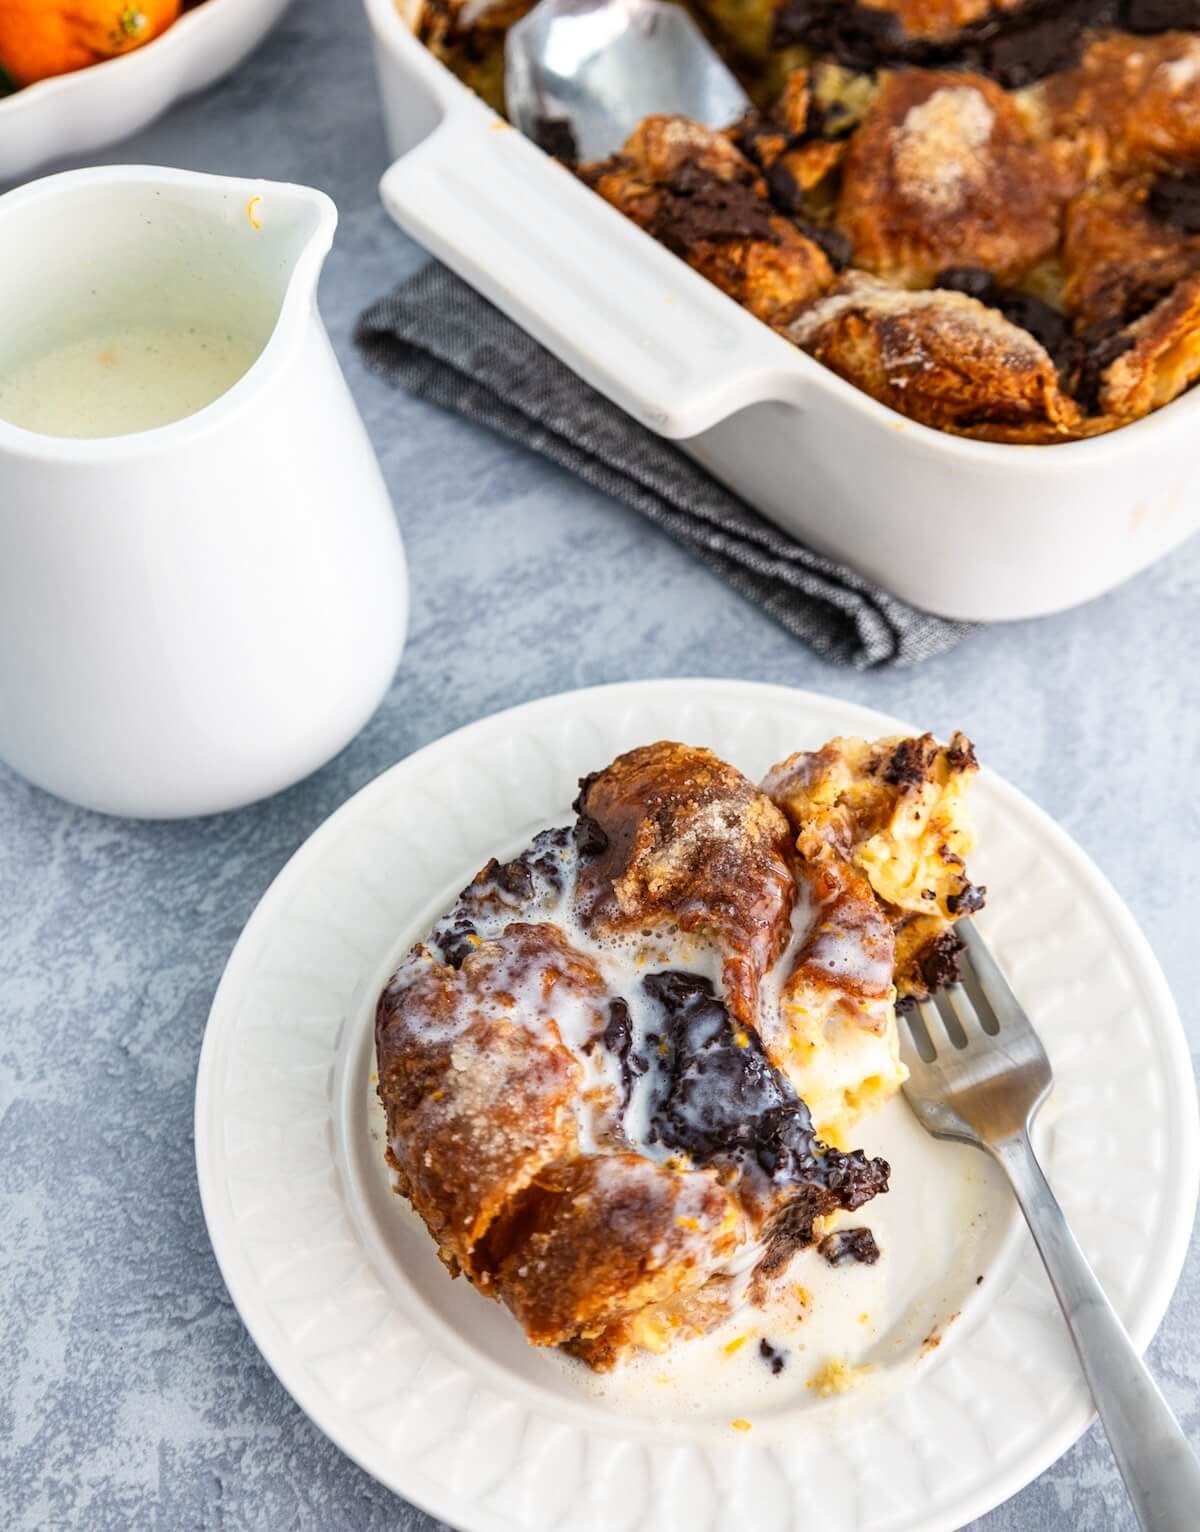 A serving of chocolate croissant bread pudding with orange creme anglaise and a fork with a bite.